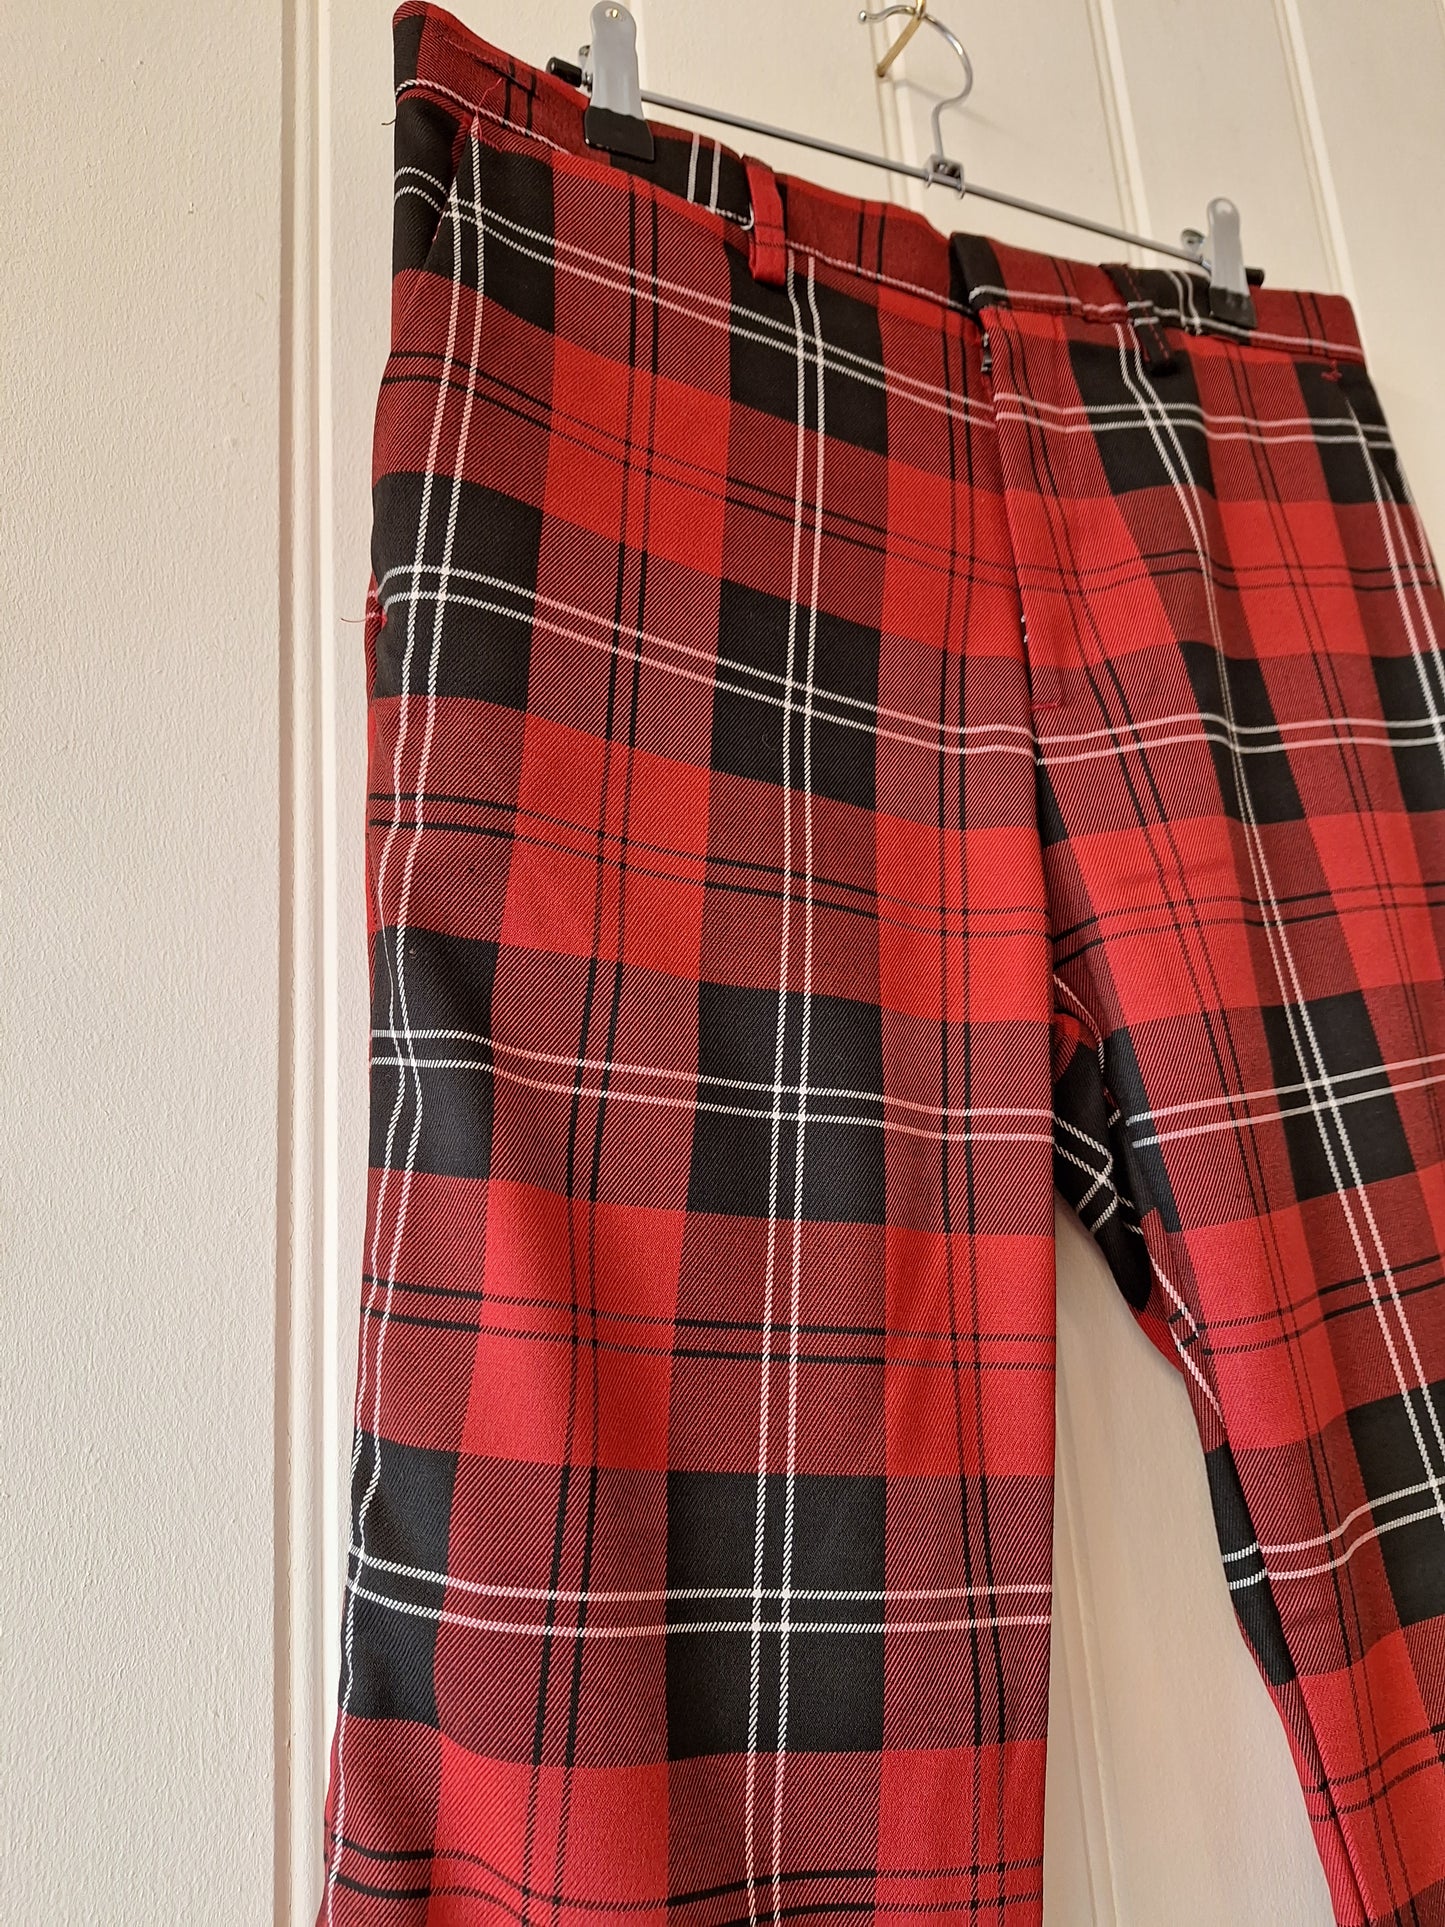 ZARA red check trousers 12